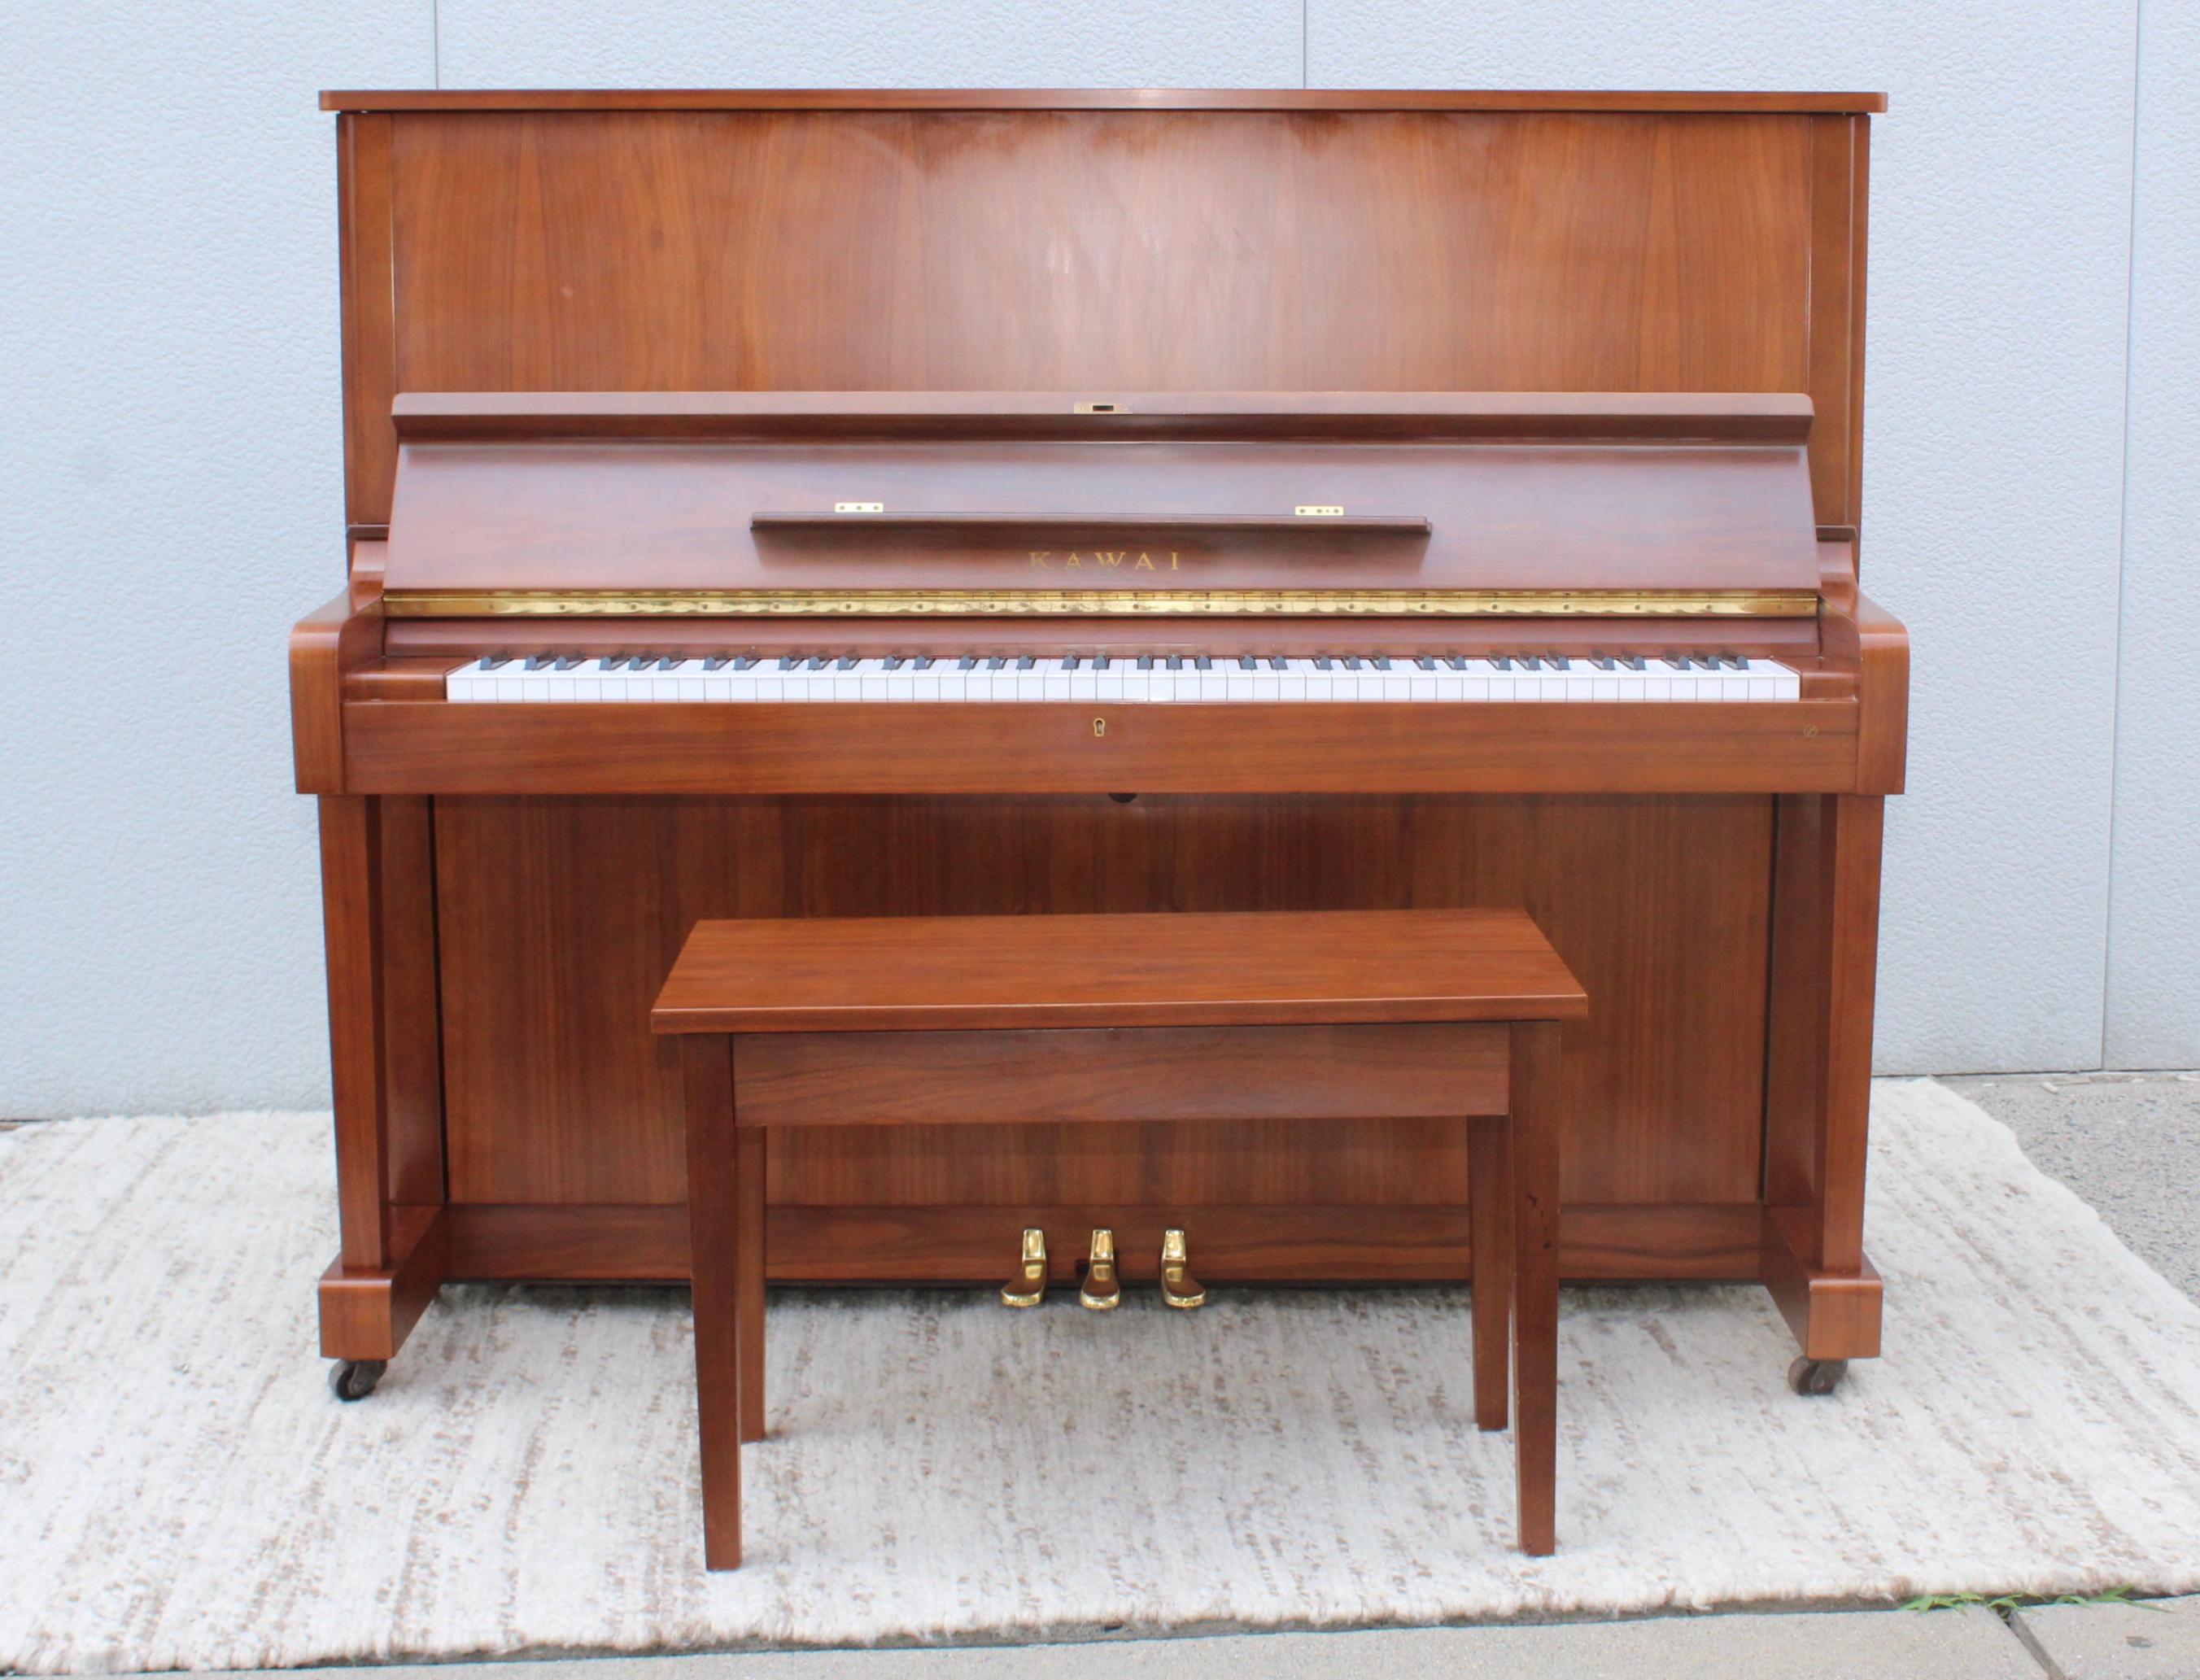 Stunning 1960s modern Kawai upright piano made of walnut with brass hardware model number K1490204. With the original stool and two keys.